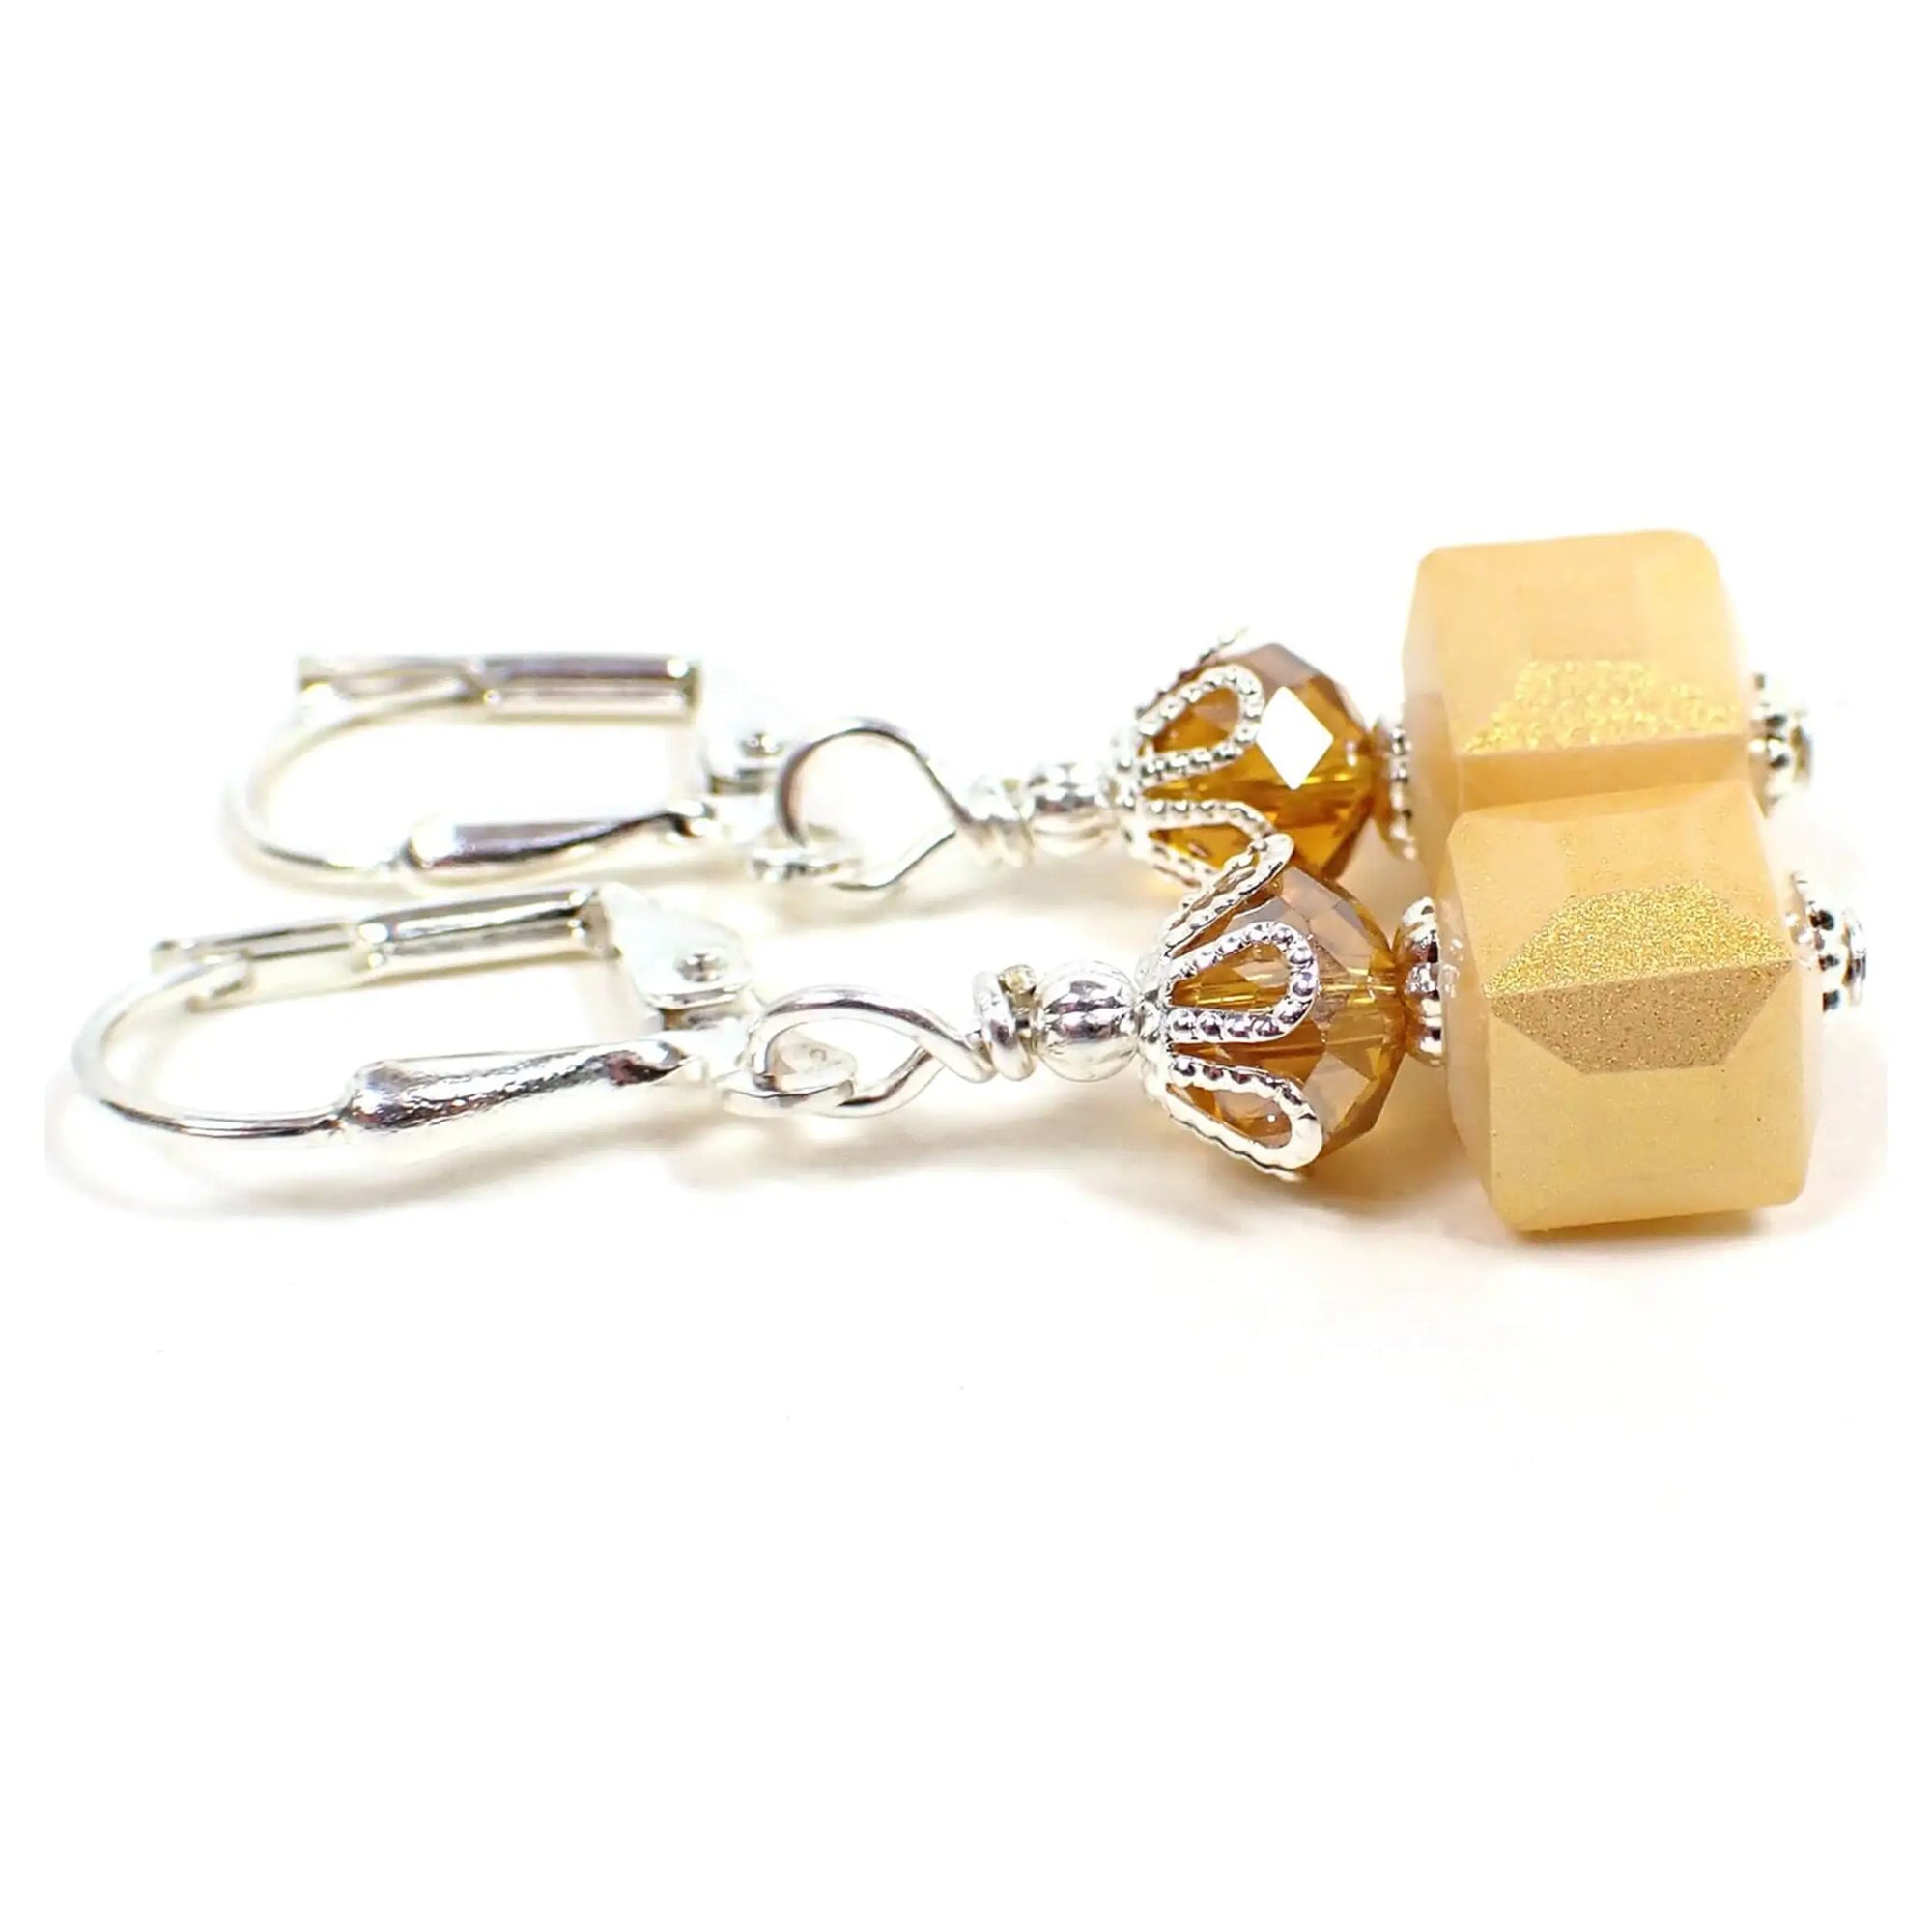 Side view of the handmade small cube earrings. The metal is silver plated in color. There are faceted glass beads at the top in a golden citrine orange color. The bottom square cube beads are a light orange with a golden sheen on the outside.